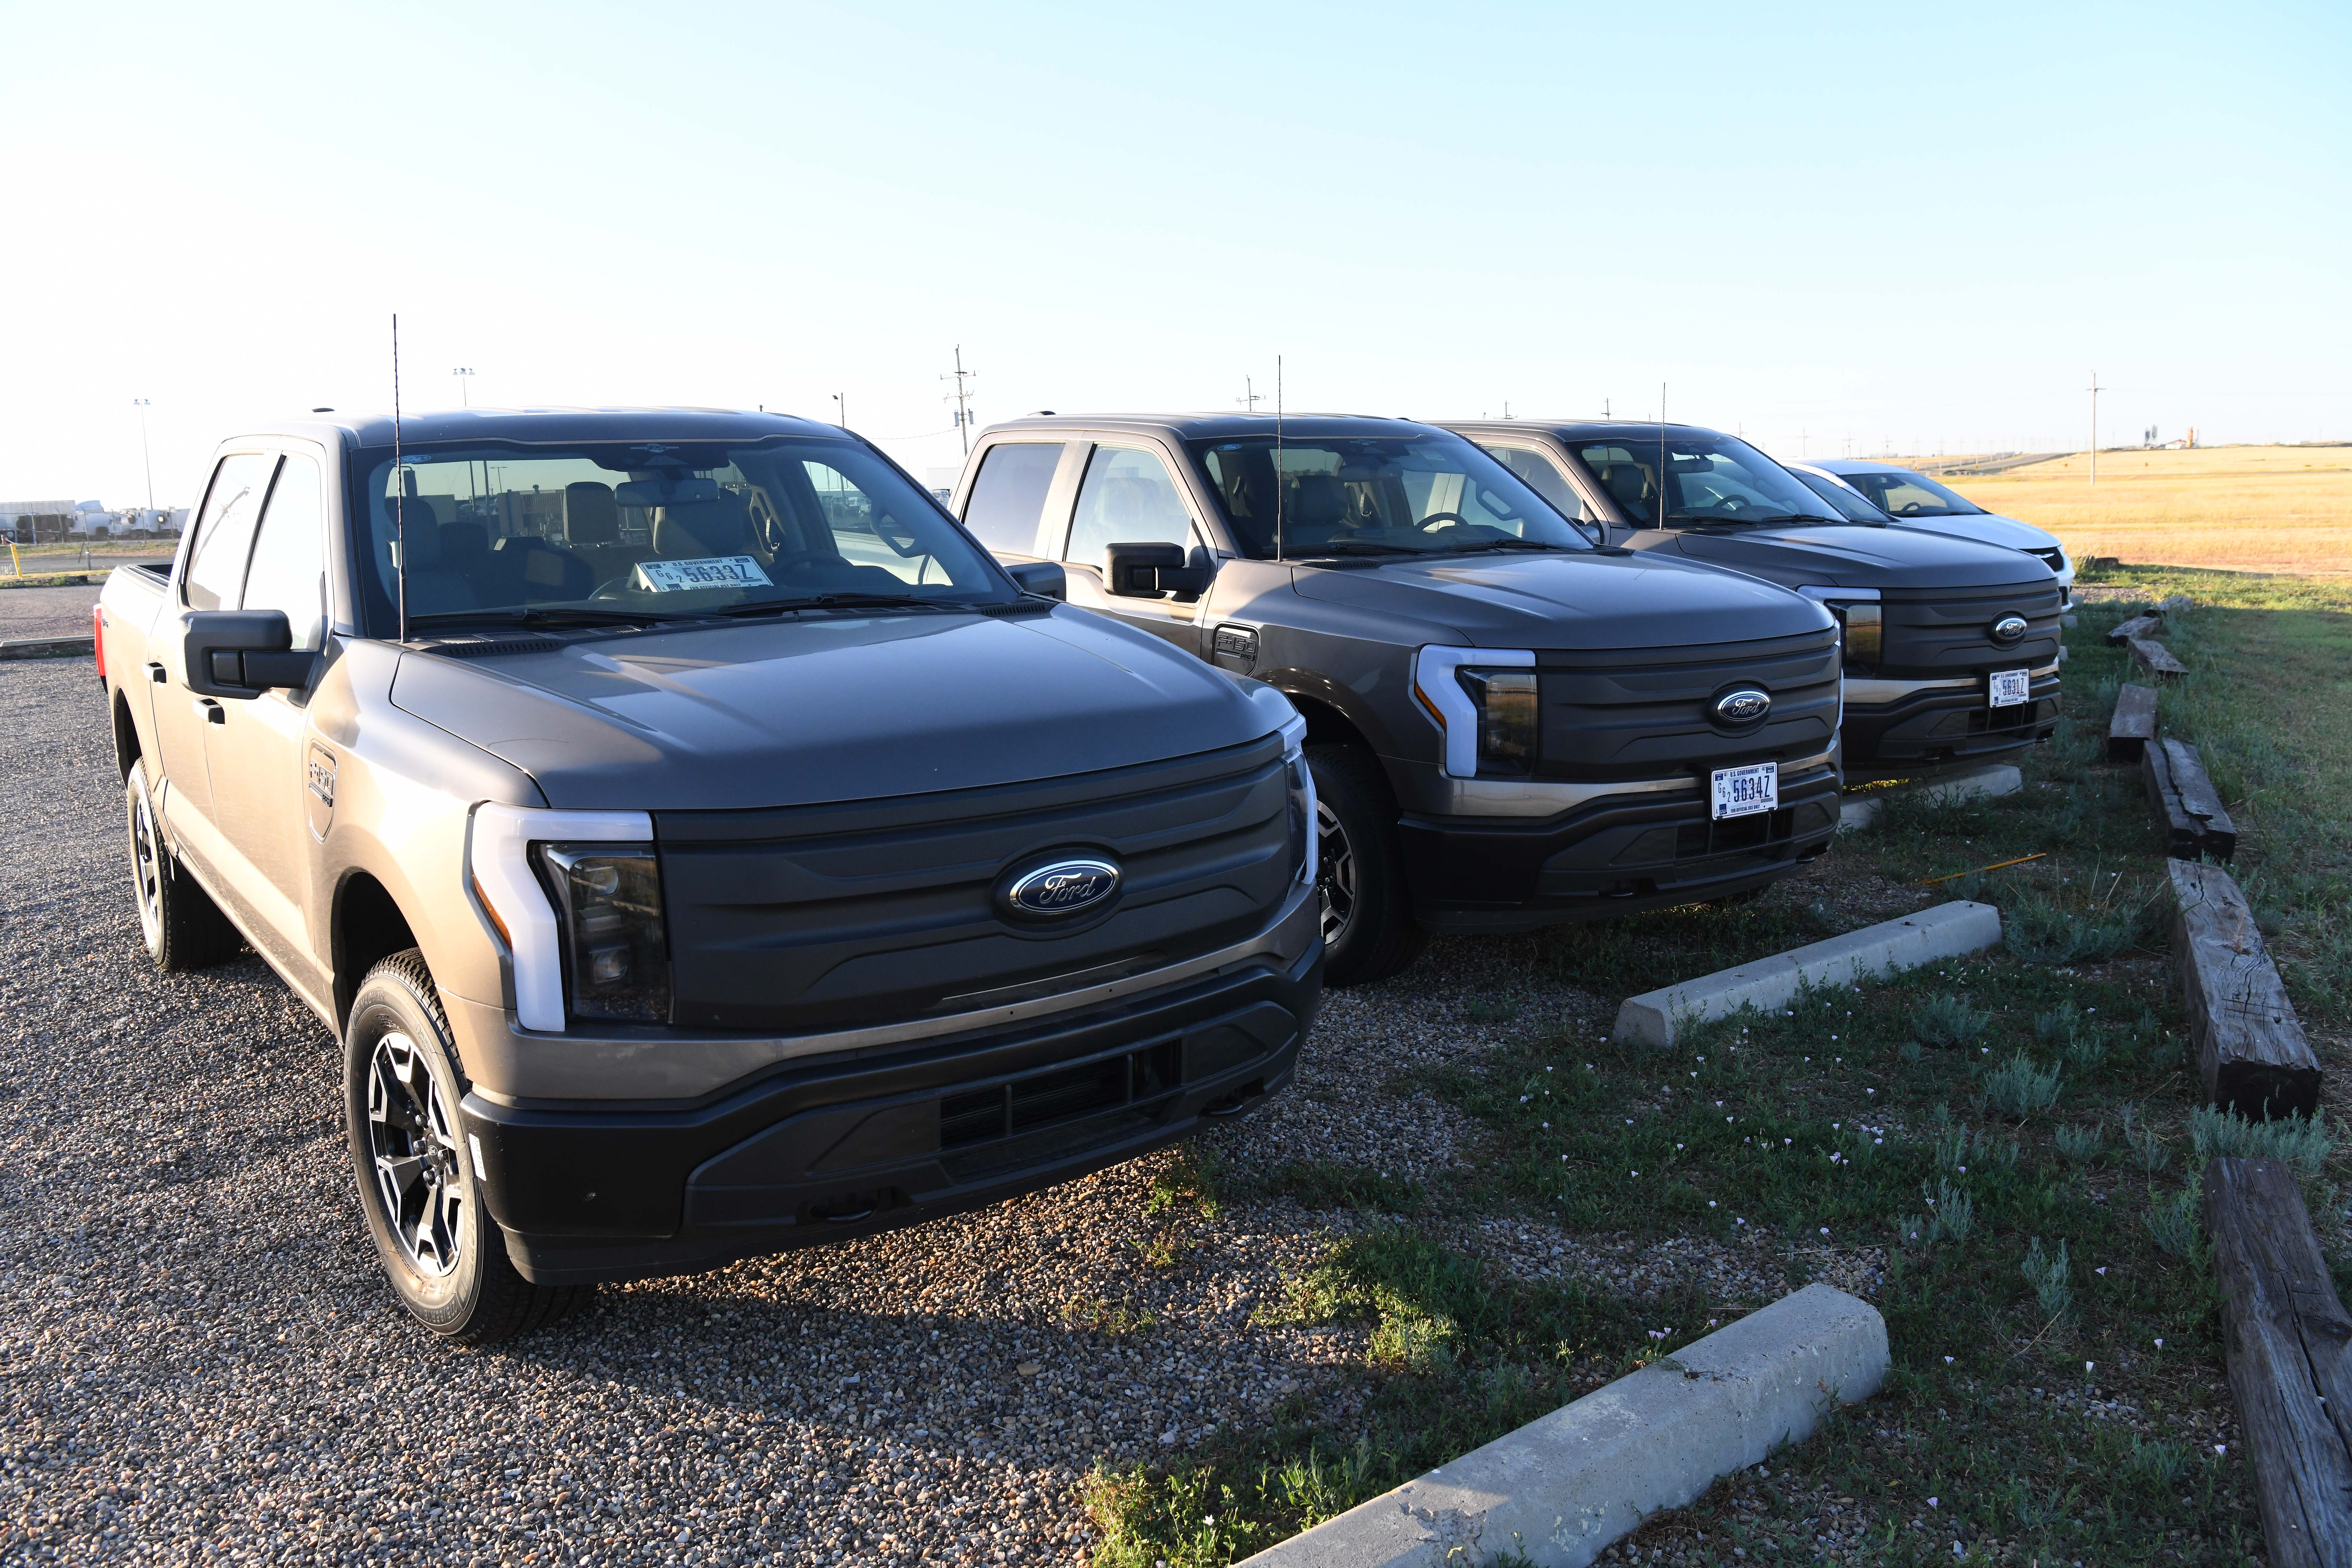 Pantex recently received three Ford F-150 Lightning electric pickups.